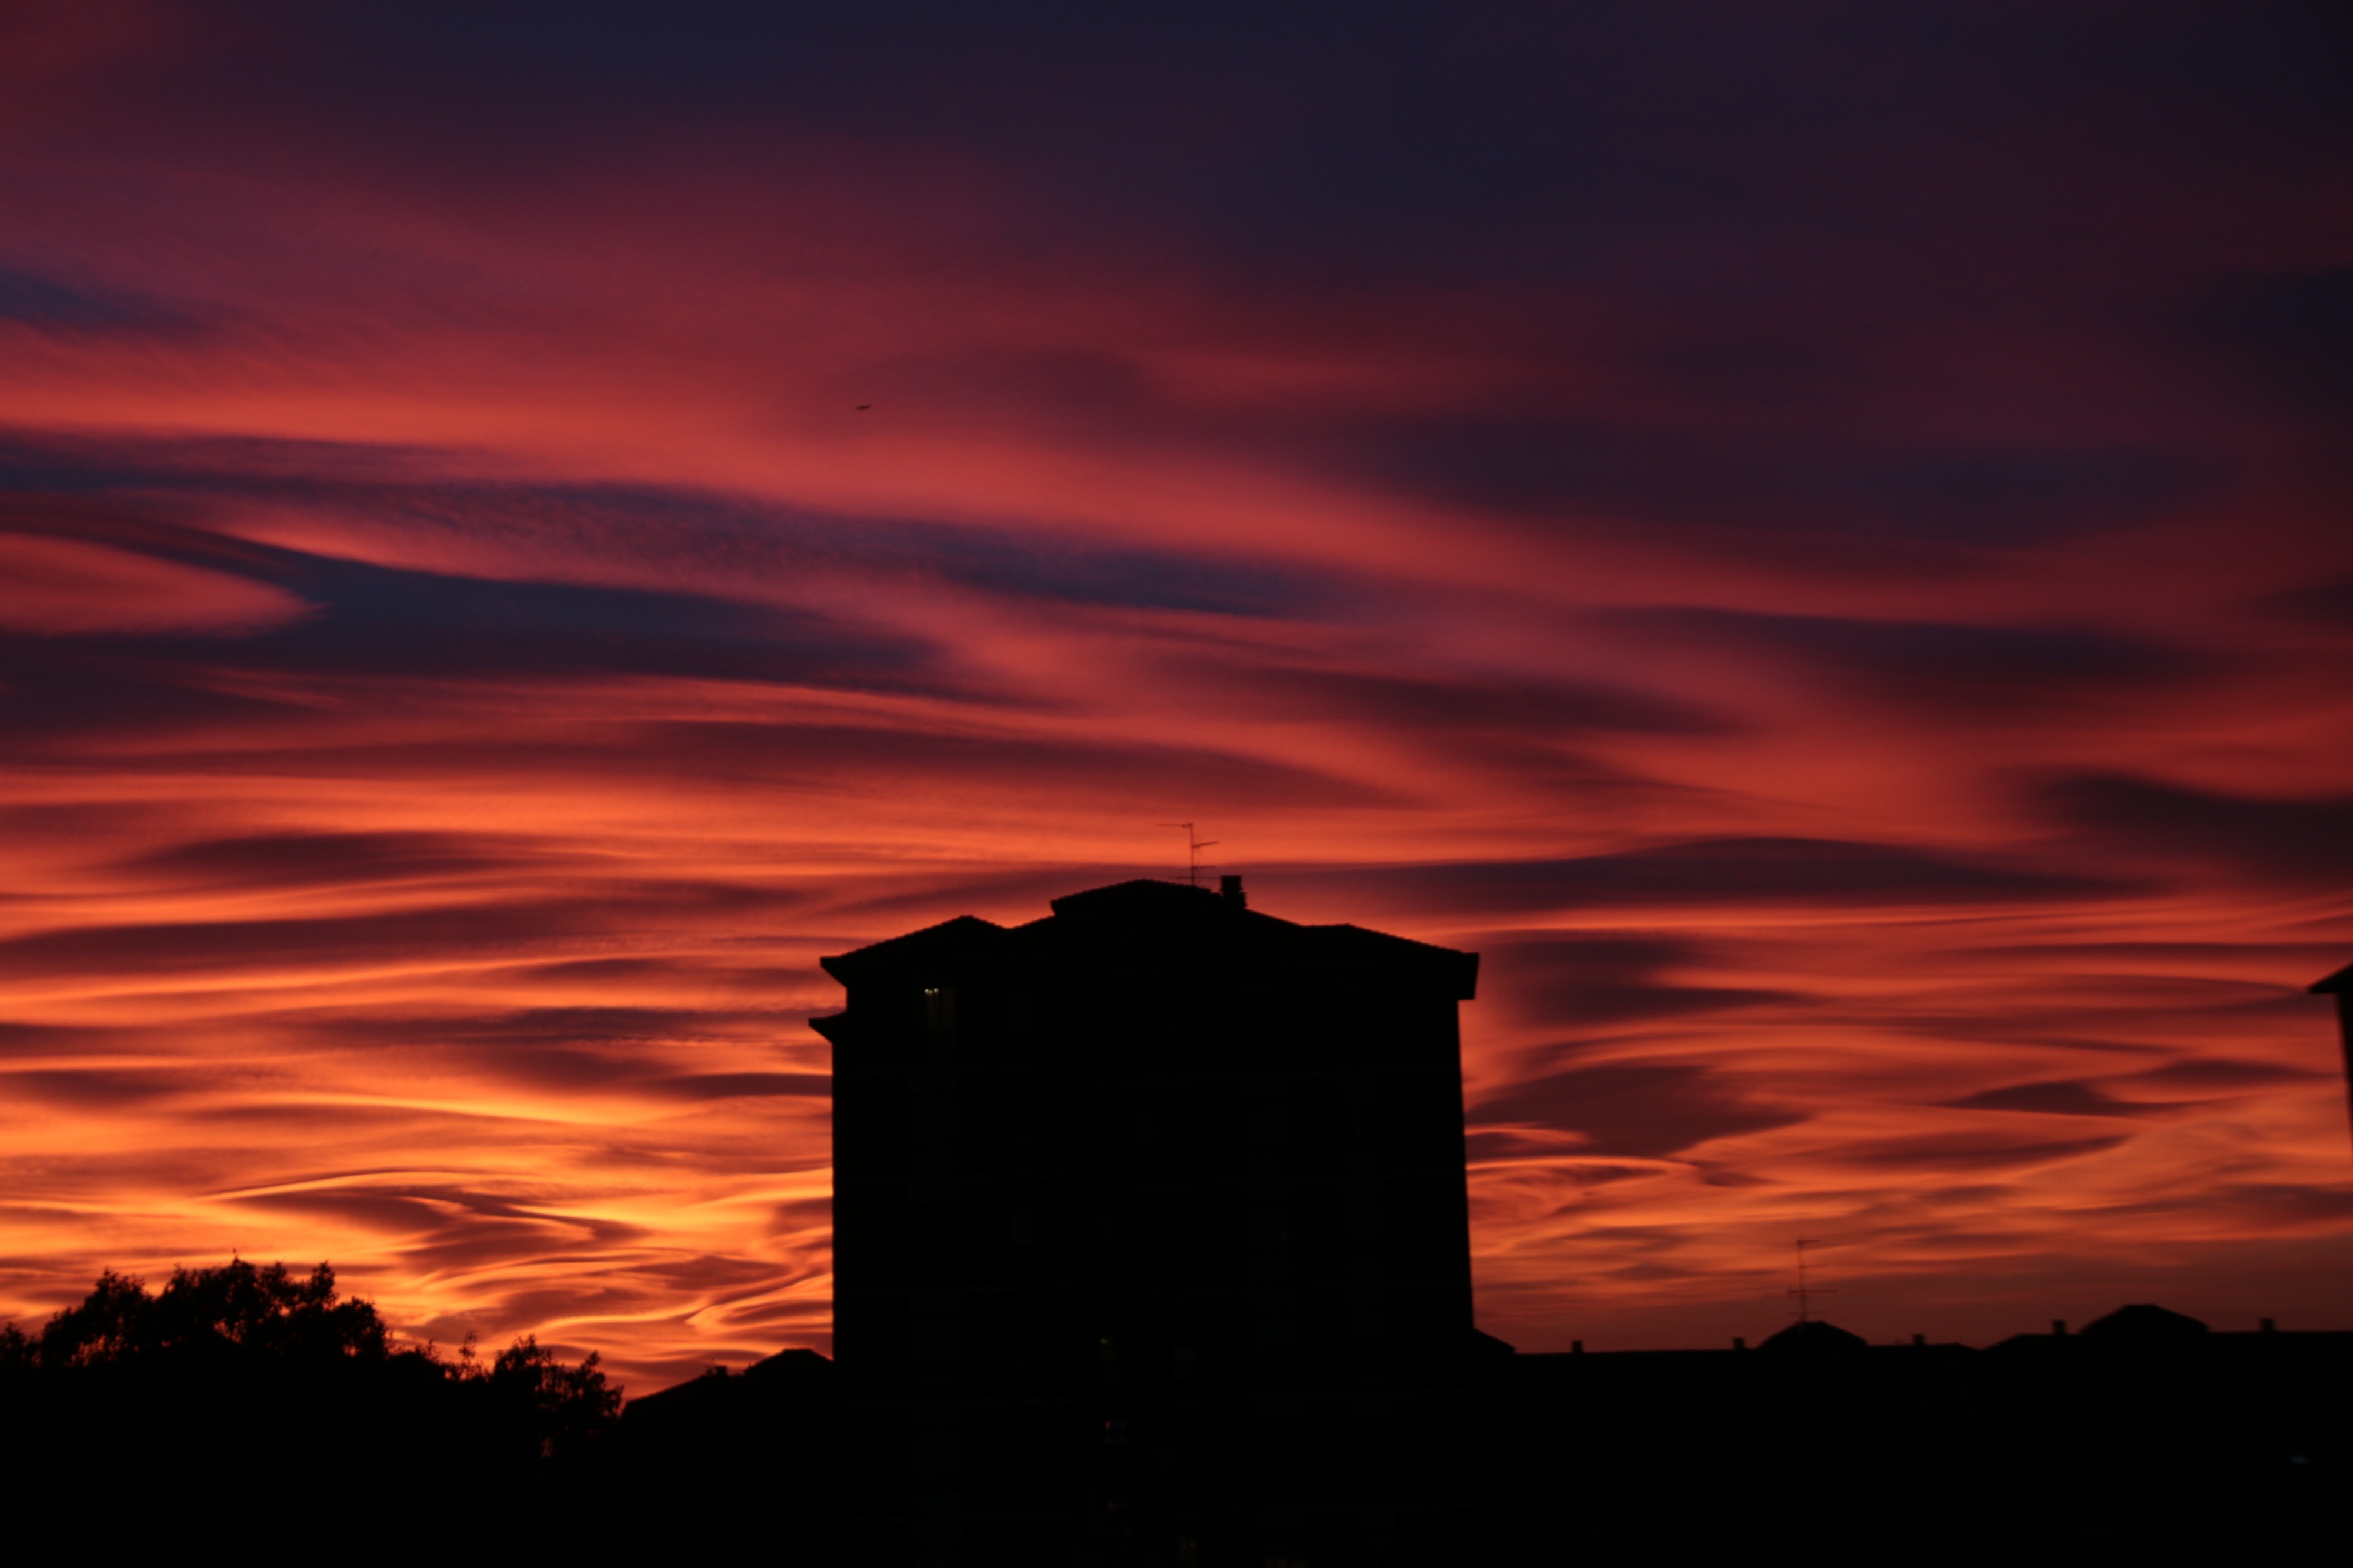 IMG 8072 - Extraordinary sunset in Milan. Photo by Giovanni Dall'Orto, October 29 2017